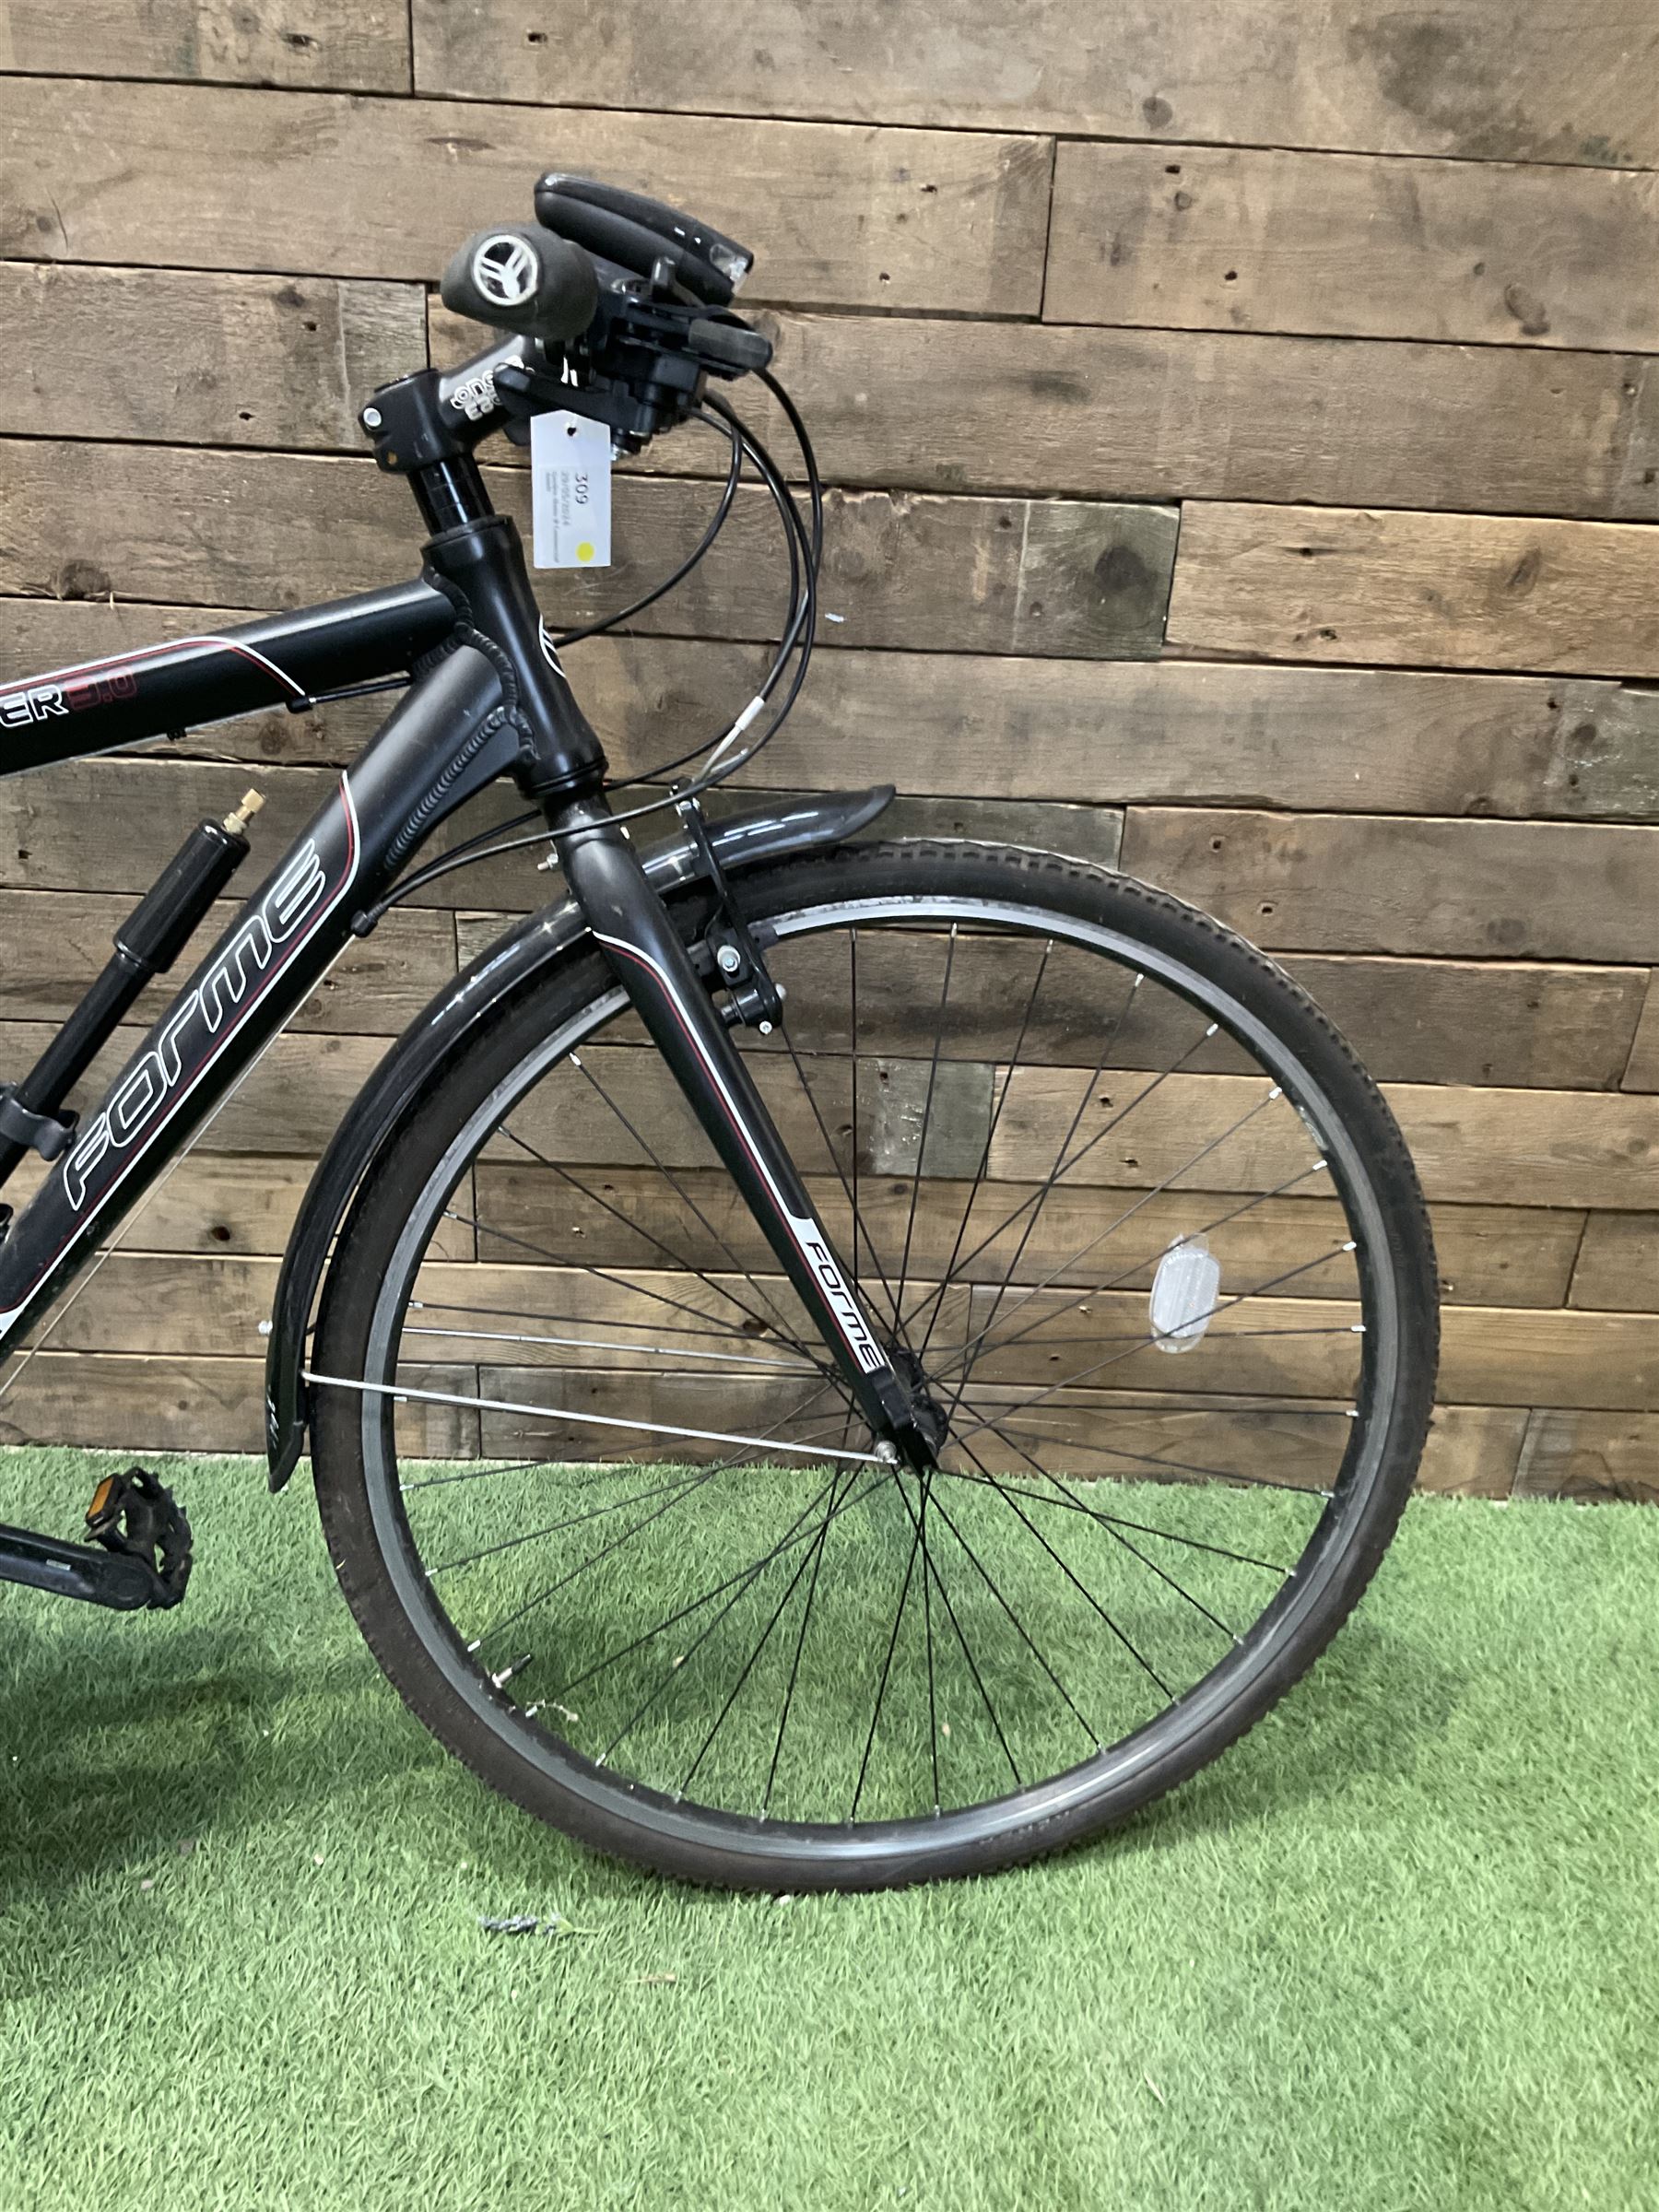 Forme Winster 3.0 cross country bike - Image 2 of 8